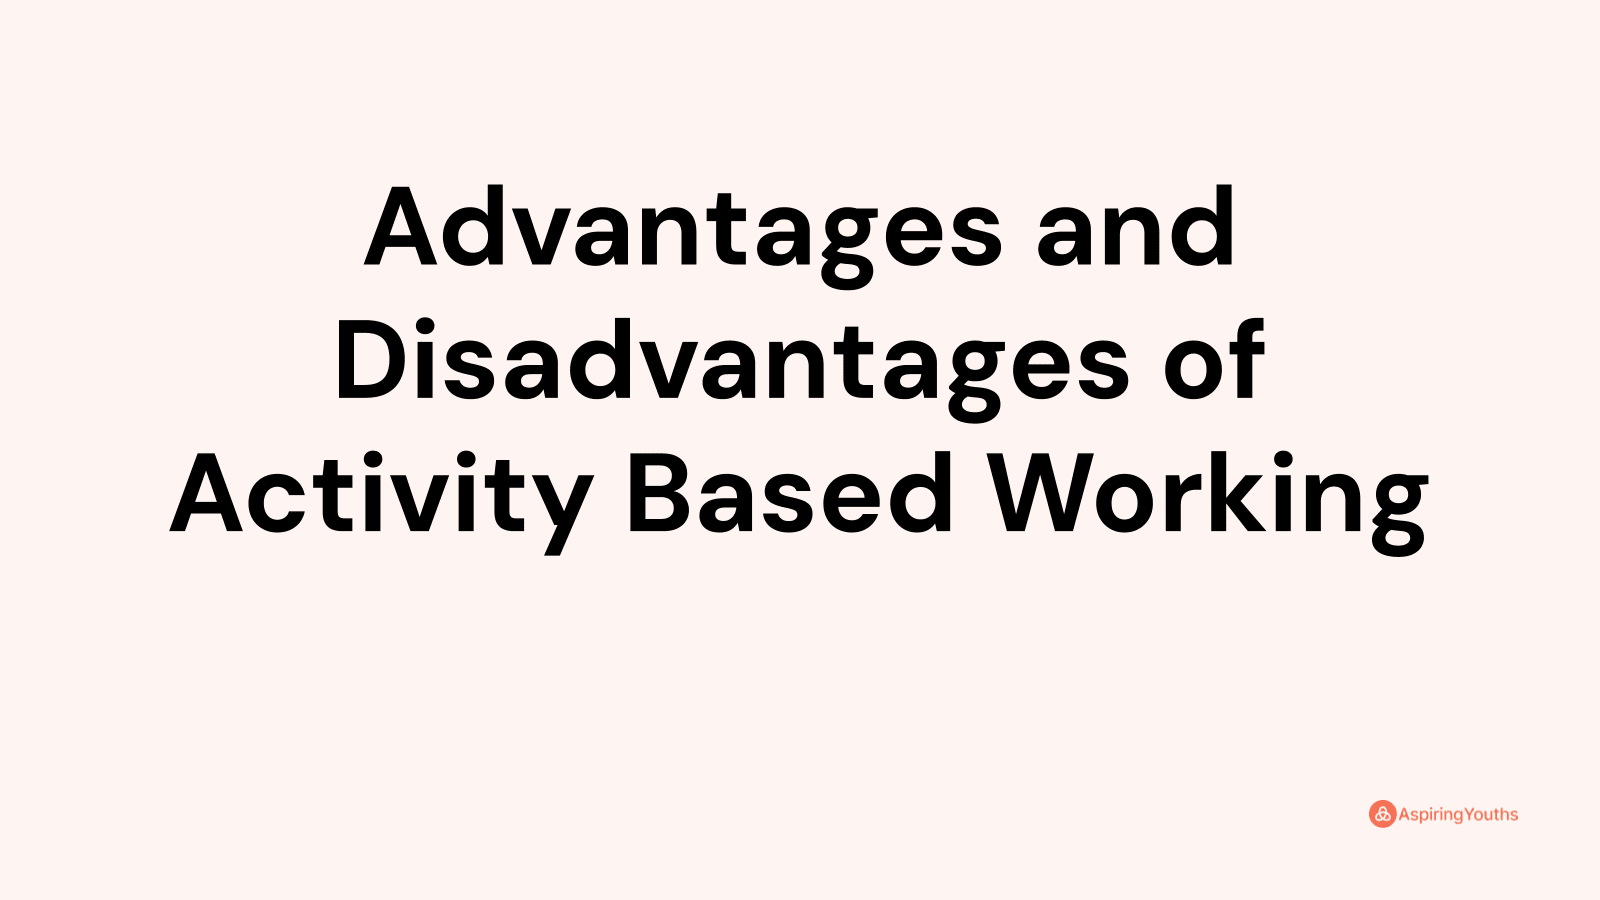 Advantages and disadvantages of Activity Based Working